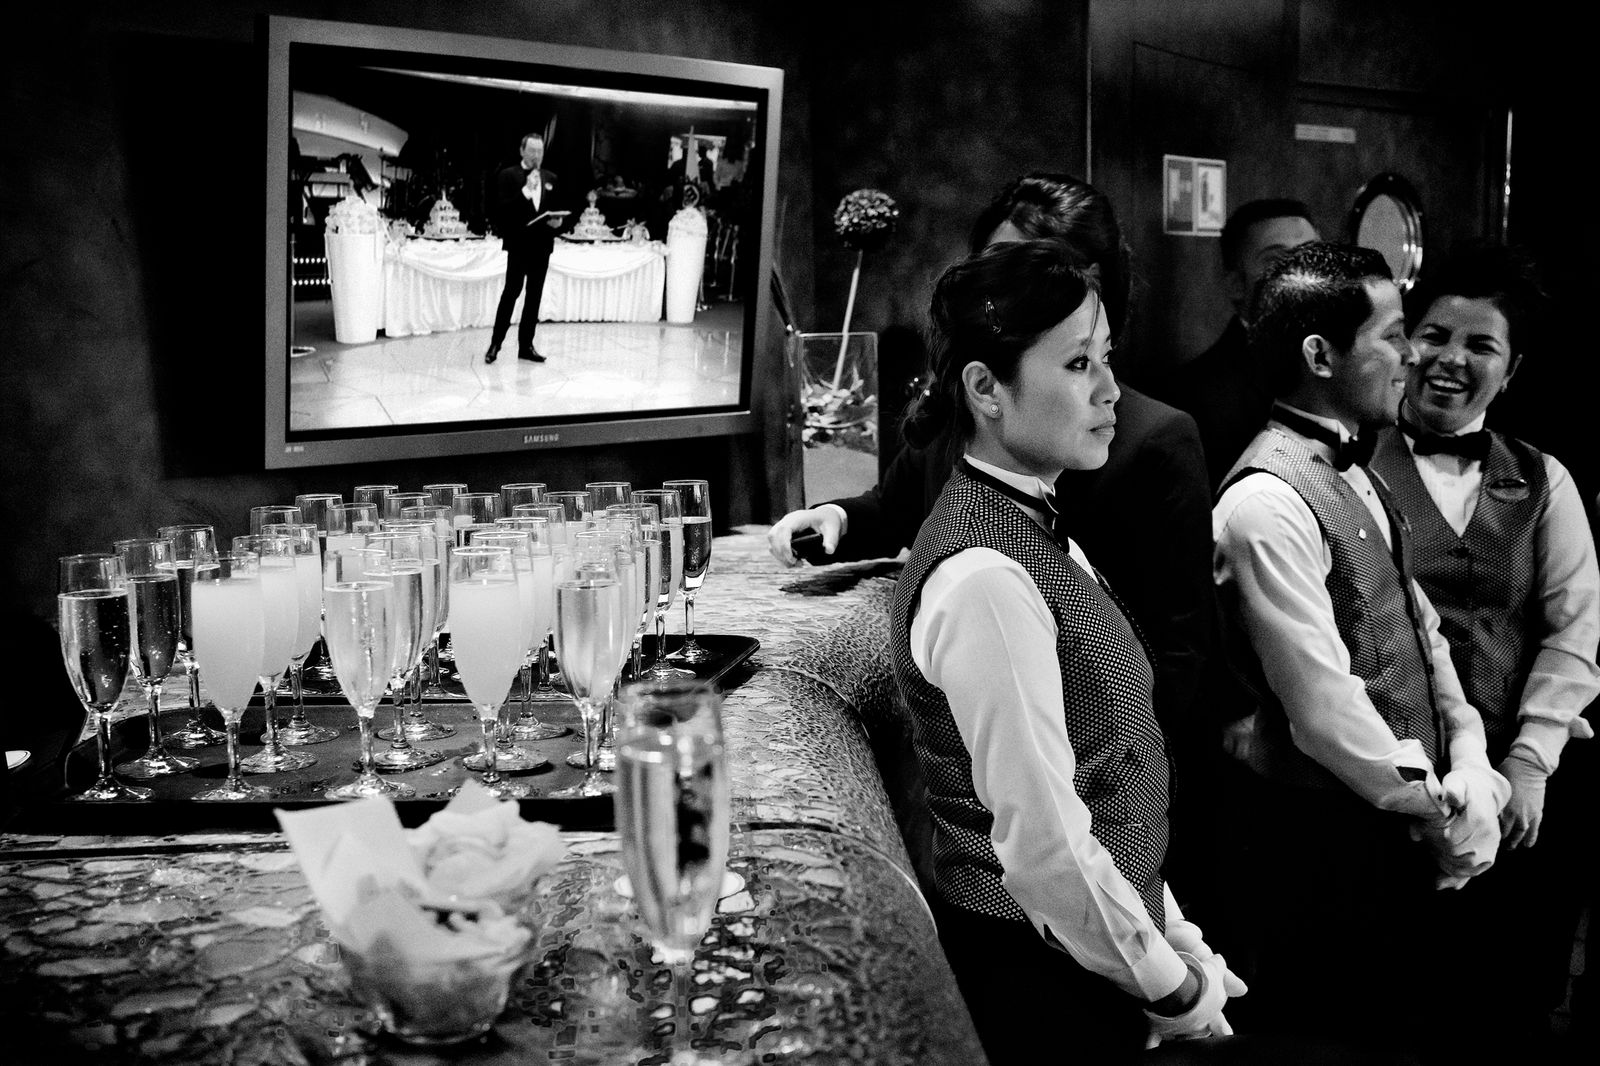 © Simona Bonanno - Waiters listening to the cruise director's speech, waiting for serving the cocktails. At sea 2015.